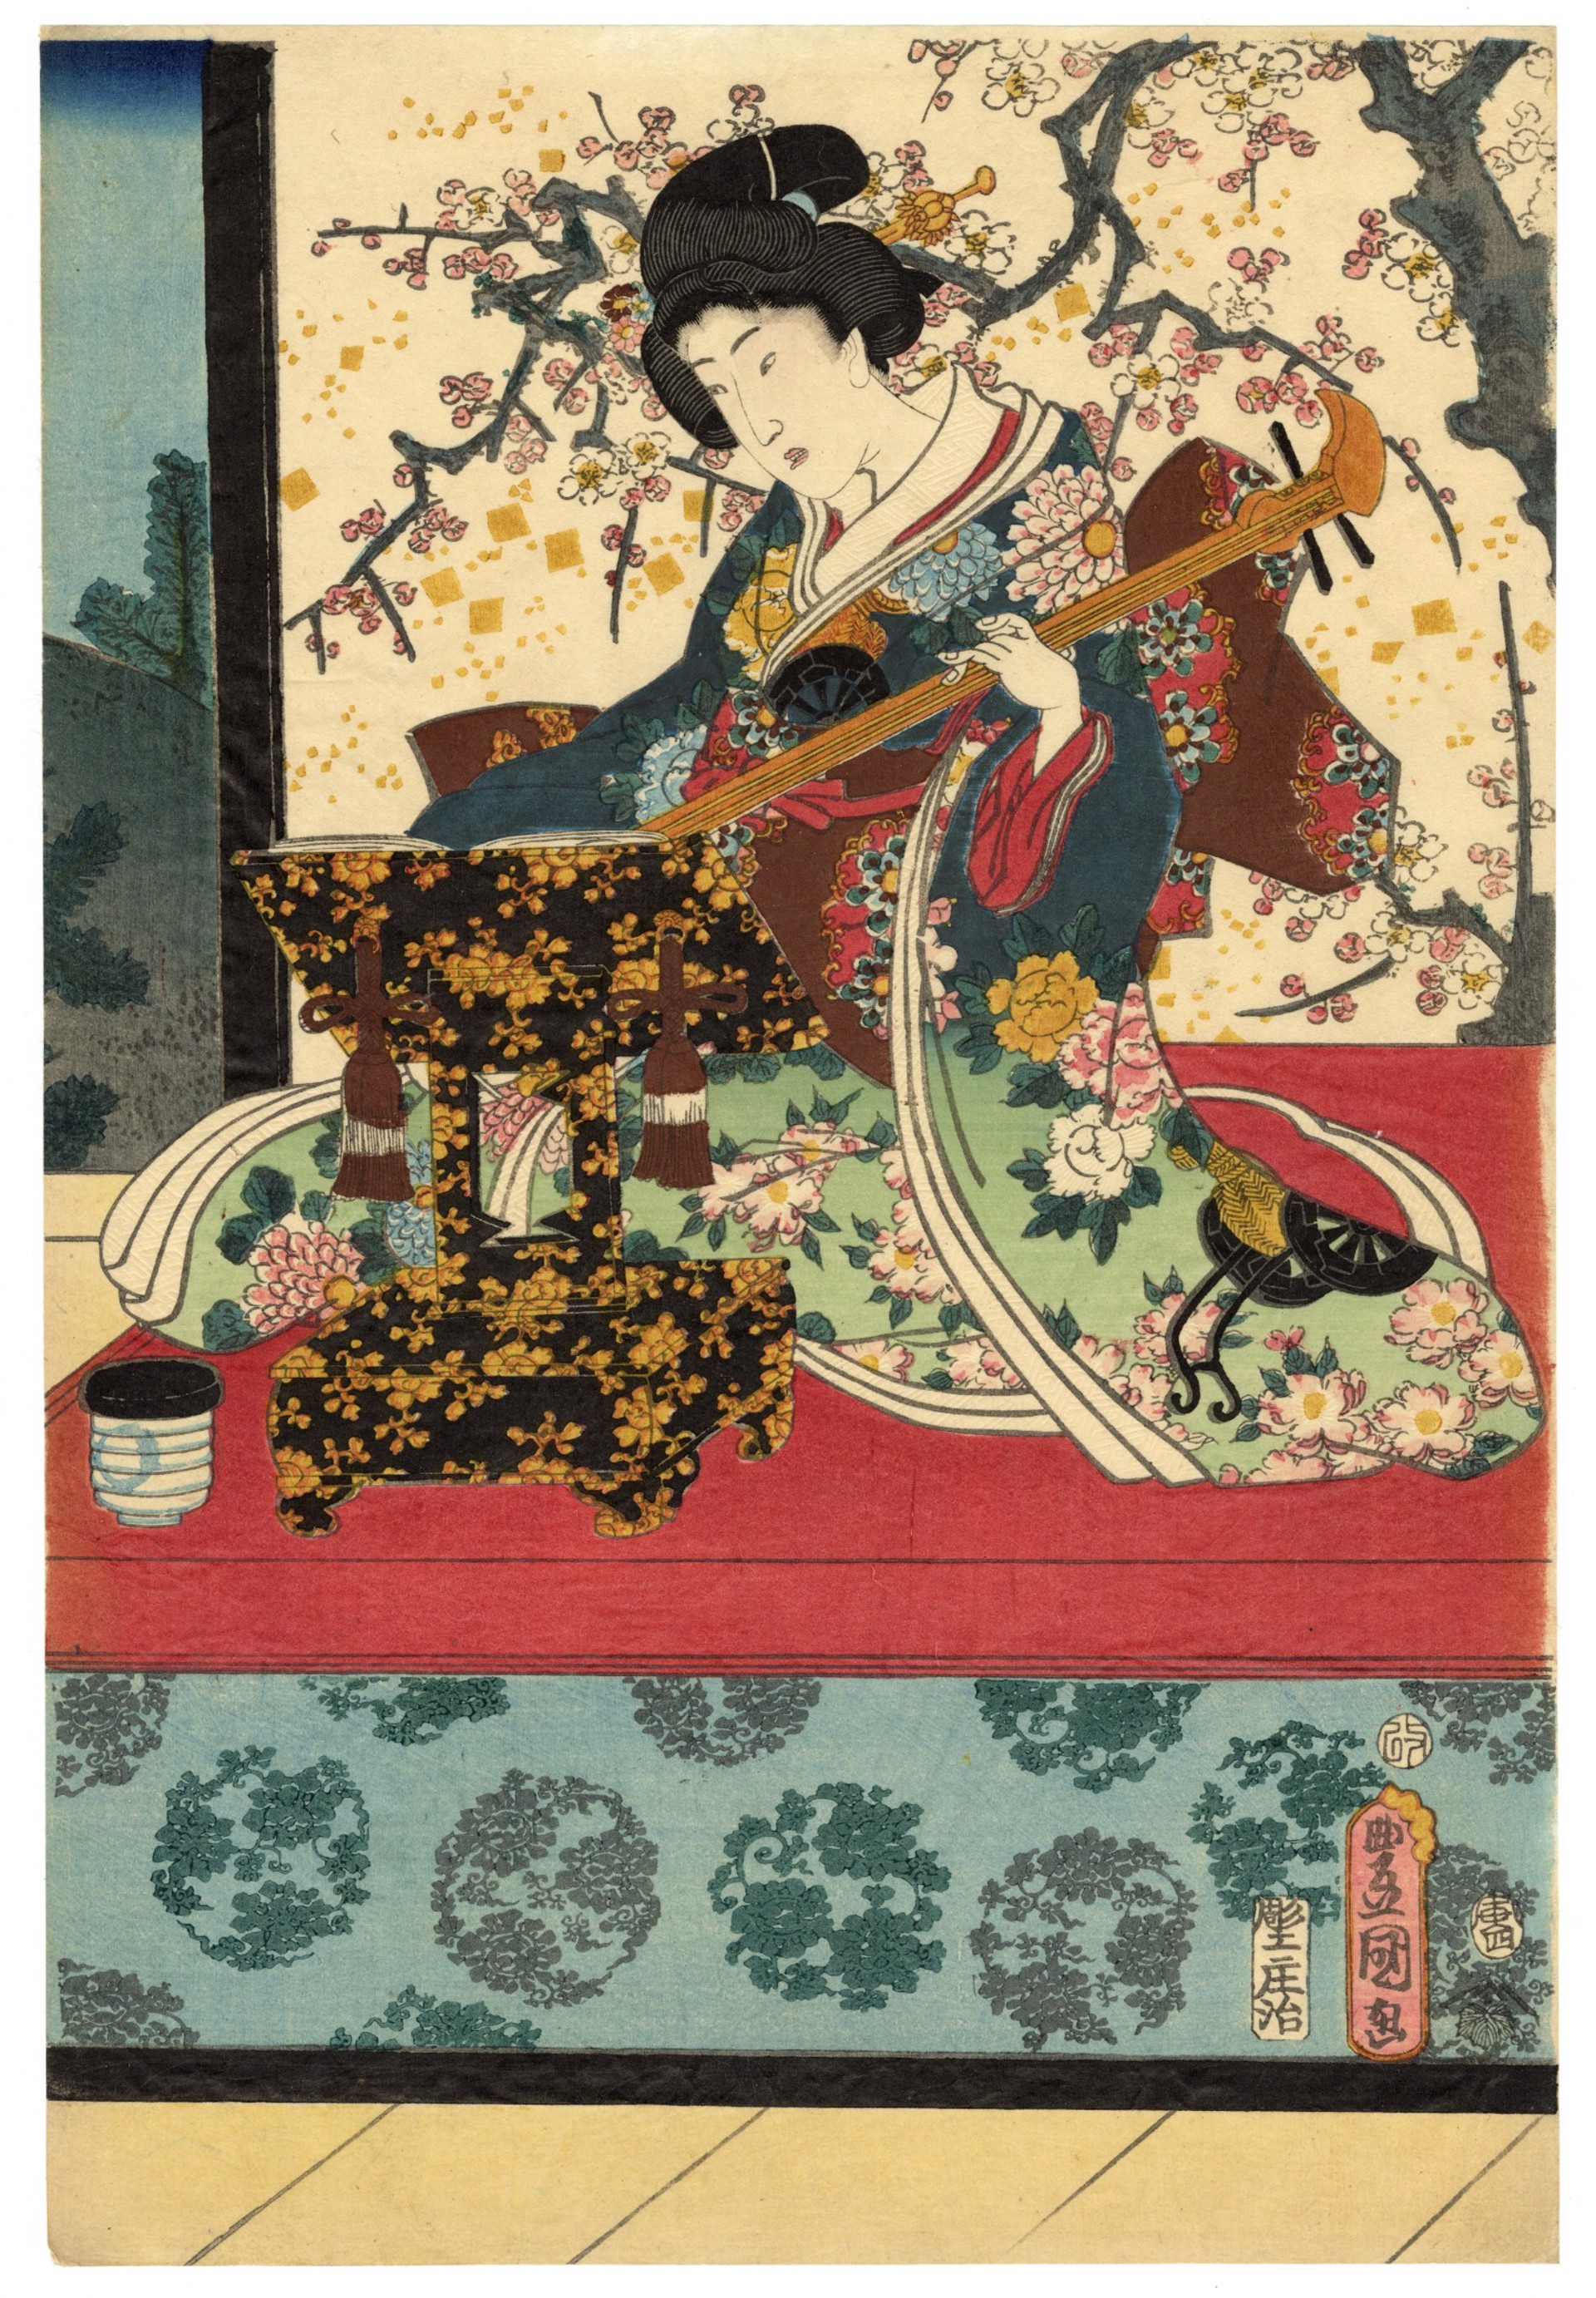 First  Month - January, Mengharu Dance Begins The 12 Months by Kunisada